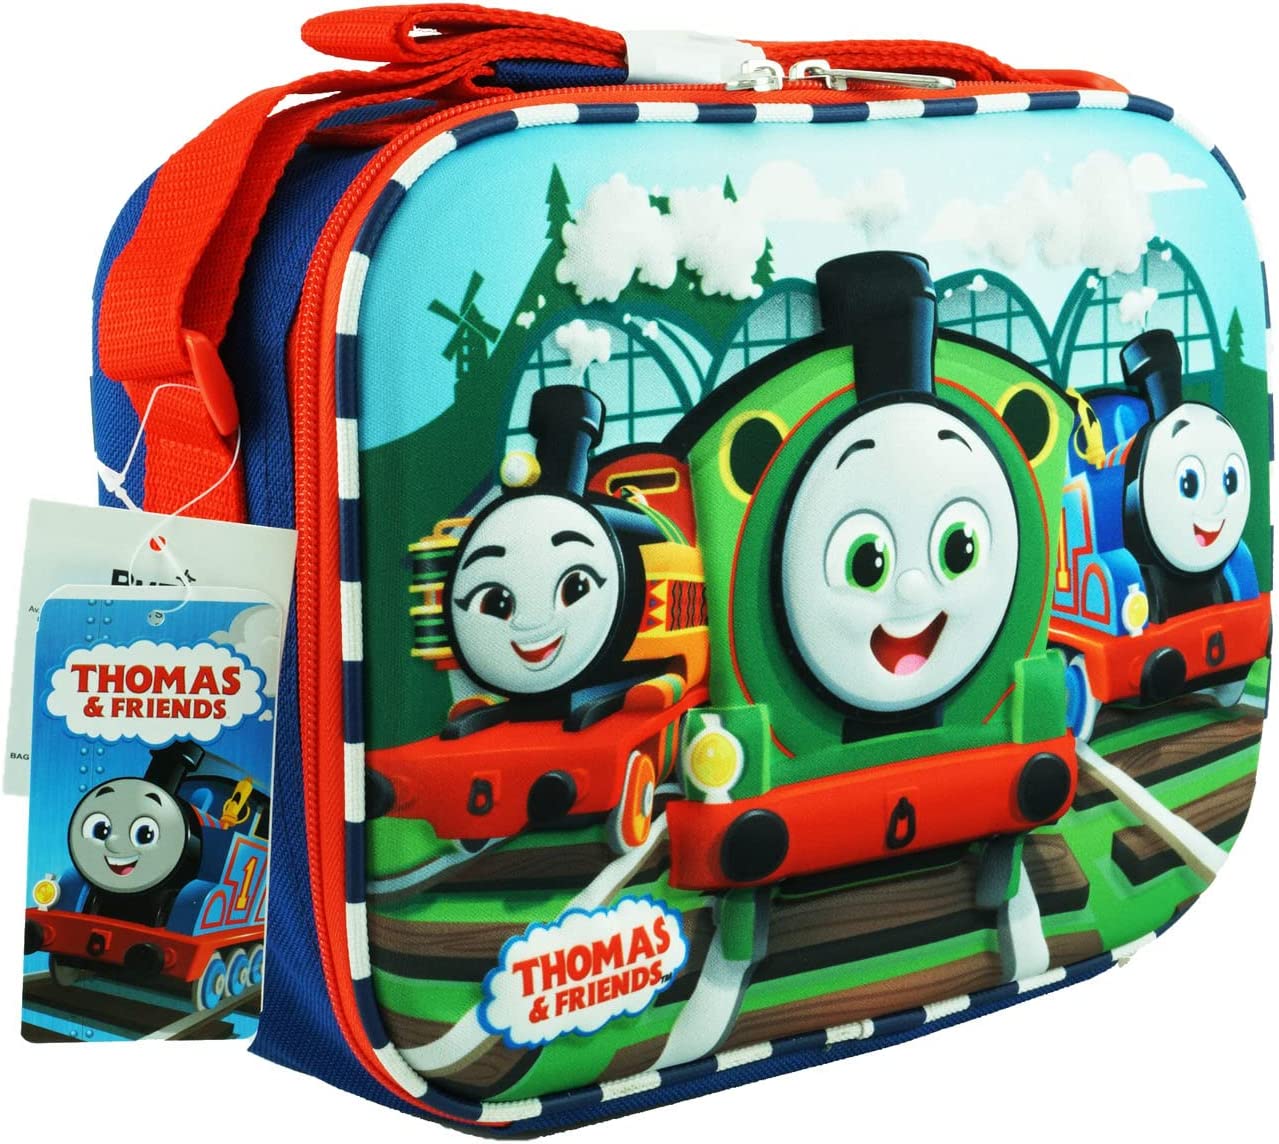 Thomas and Friends Lunch Box 3-D EVA Molded Lunch bag - Percy Nia